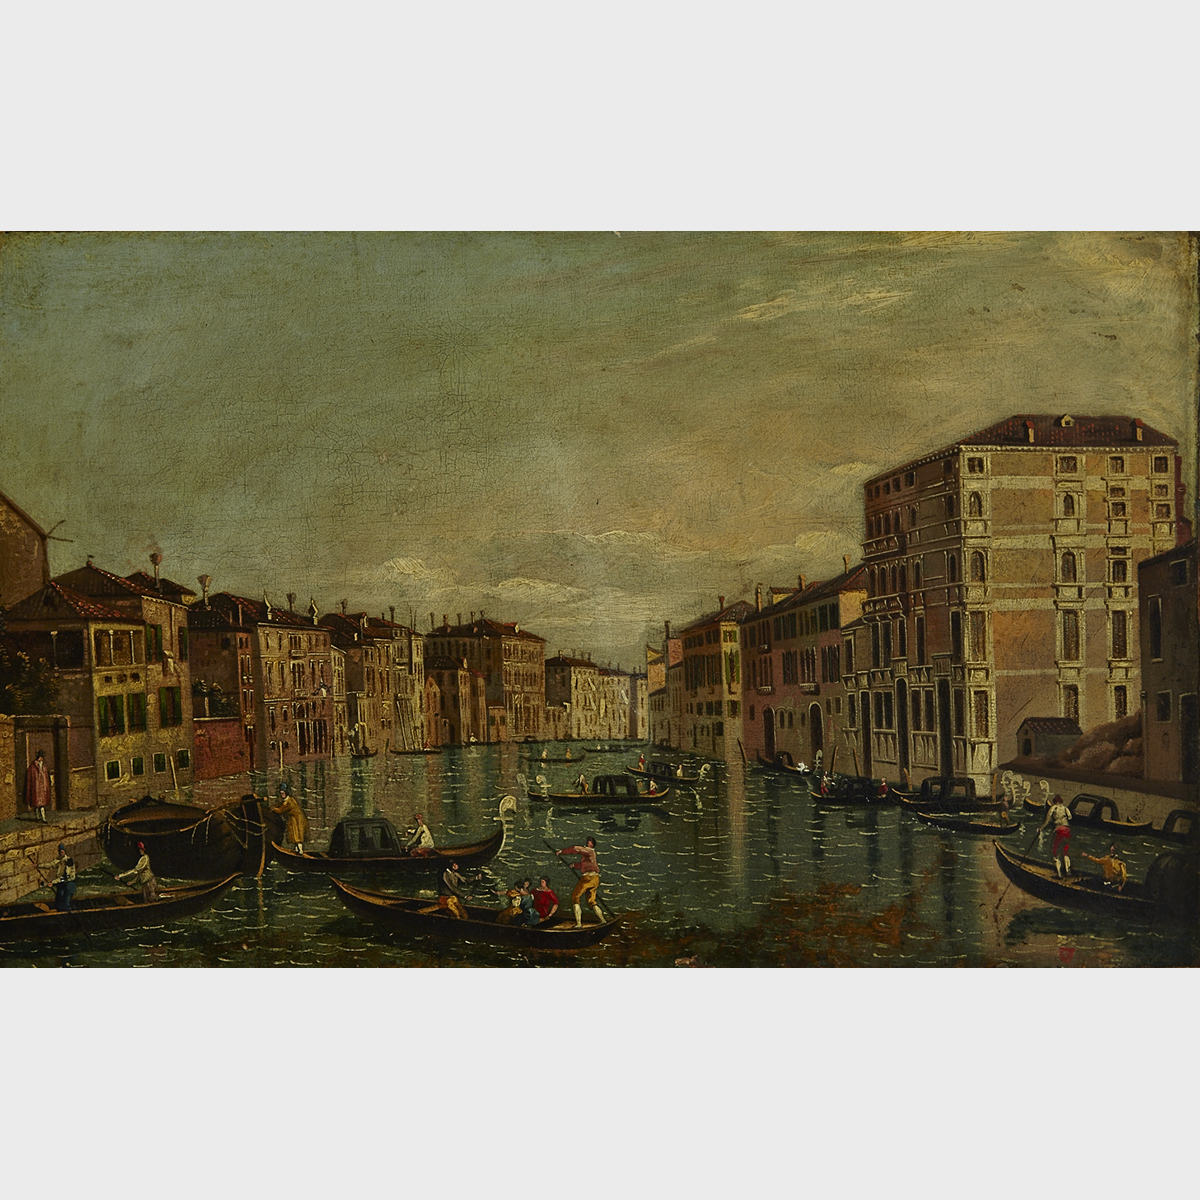 Follower of Canaletto (1697-1768)